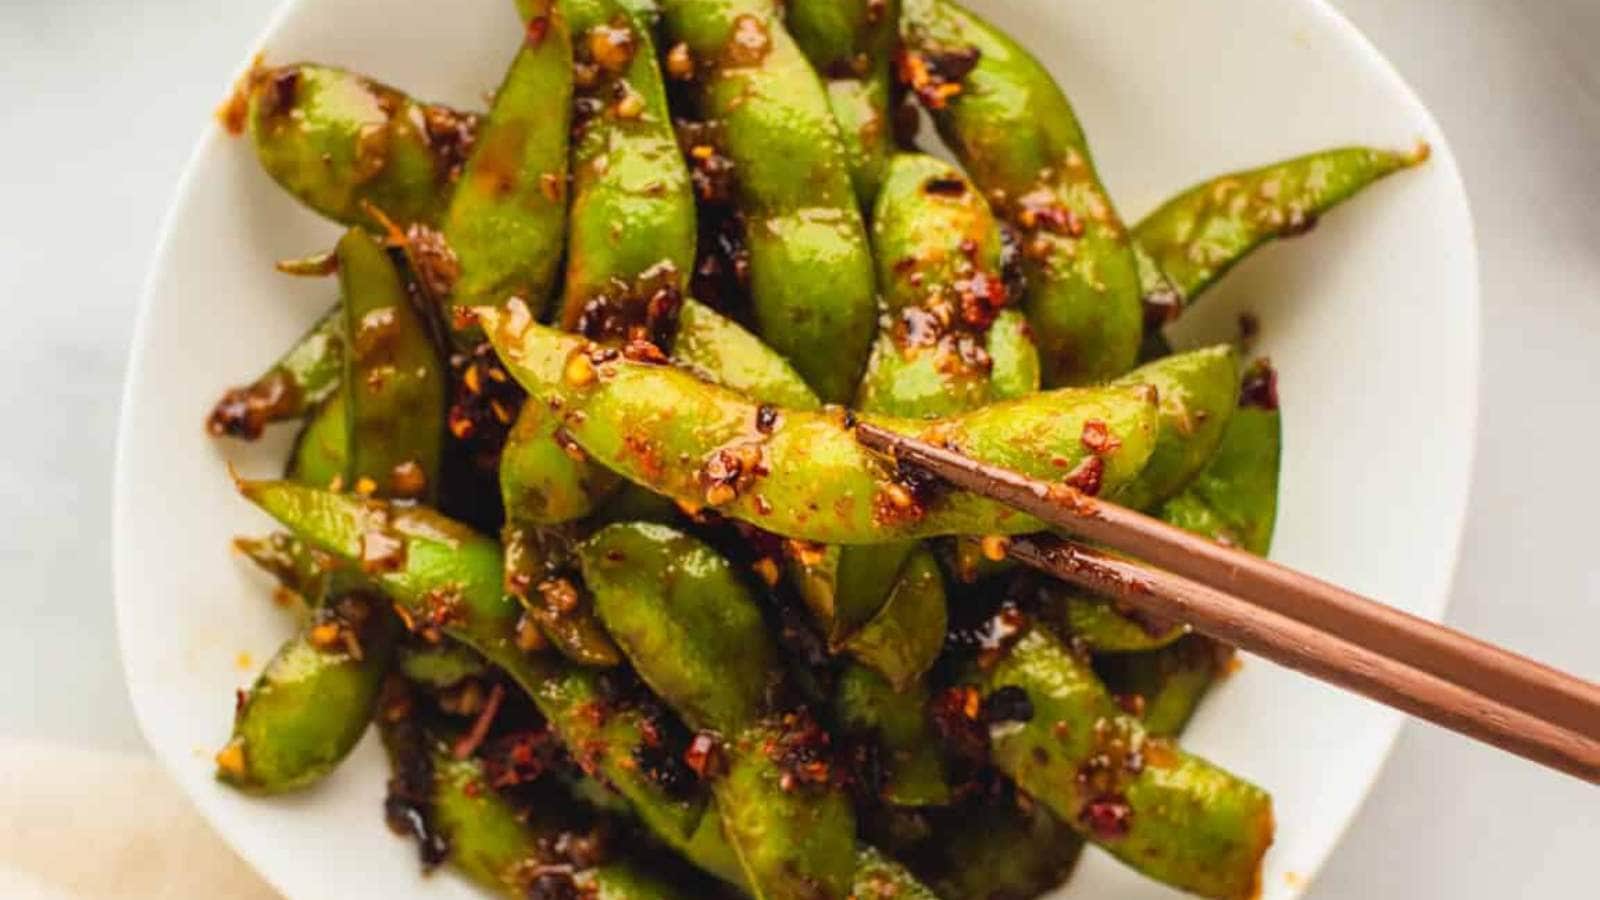 Spicy Edamame With Garlic recipe by Mikha Eats.